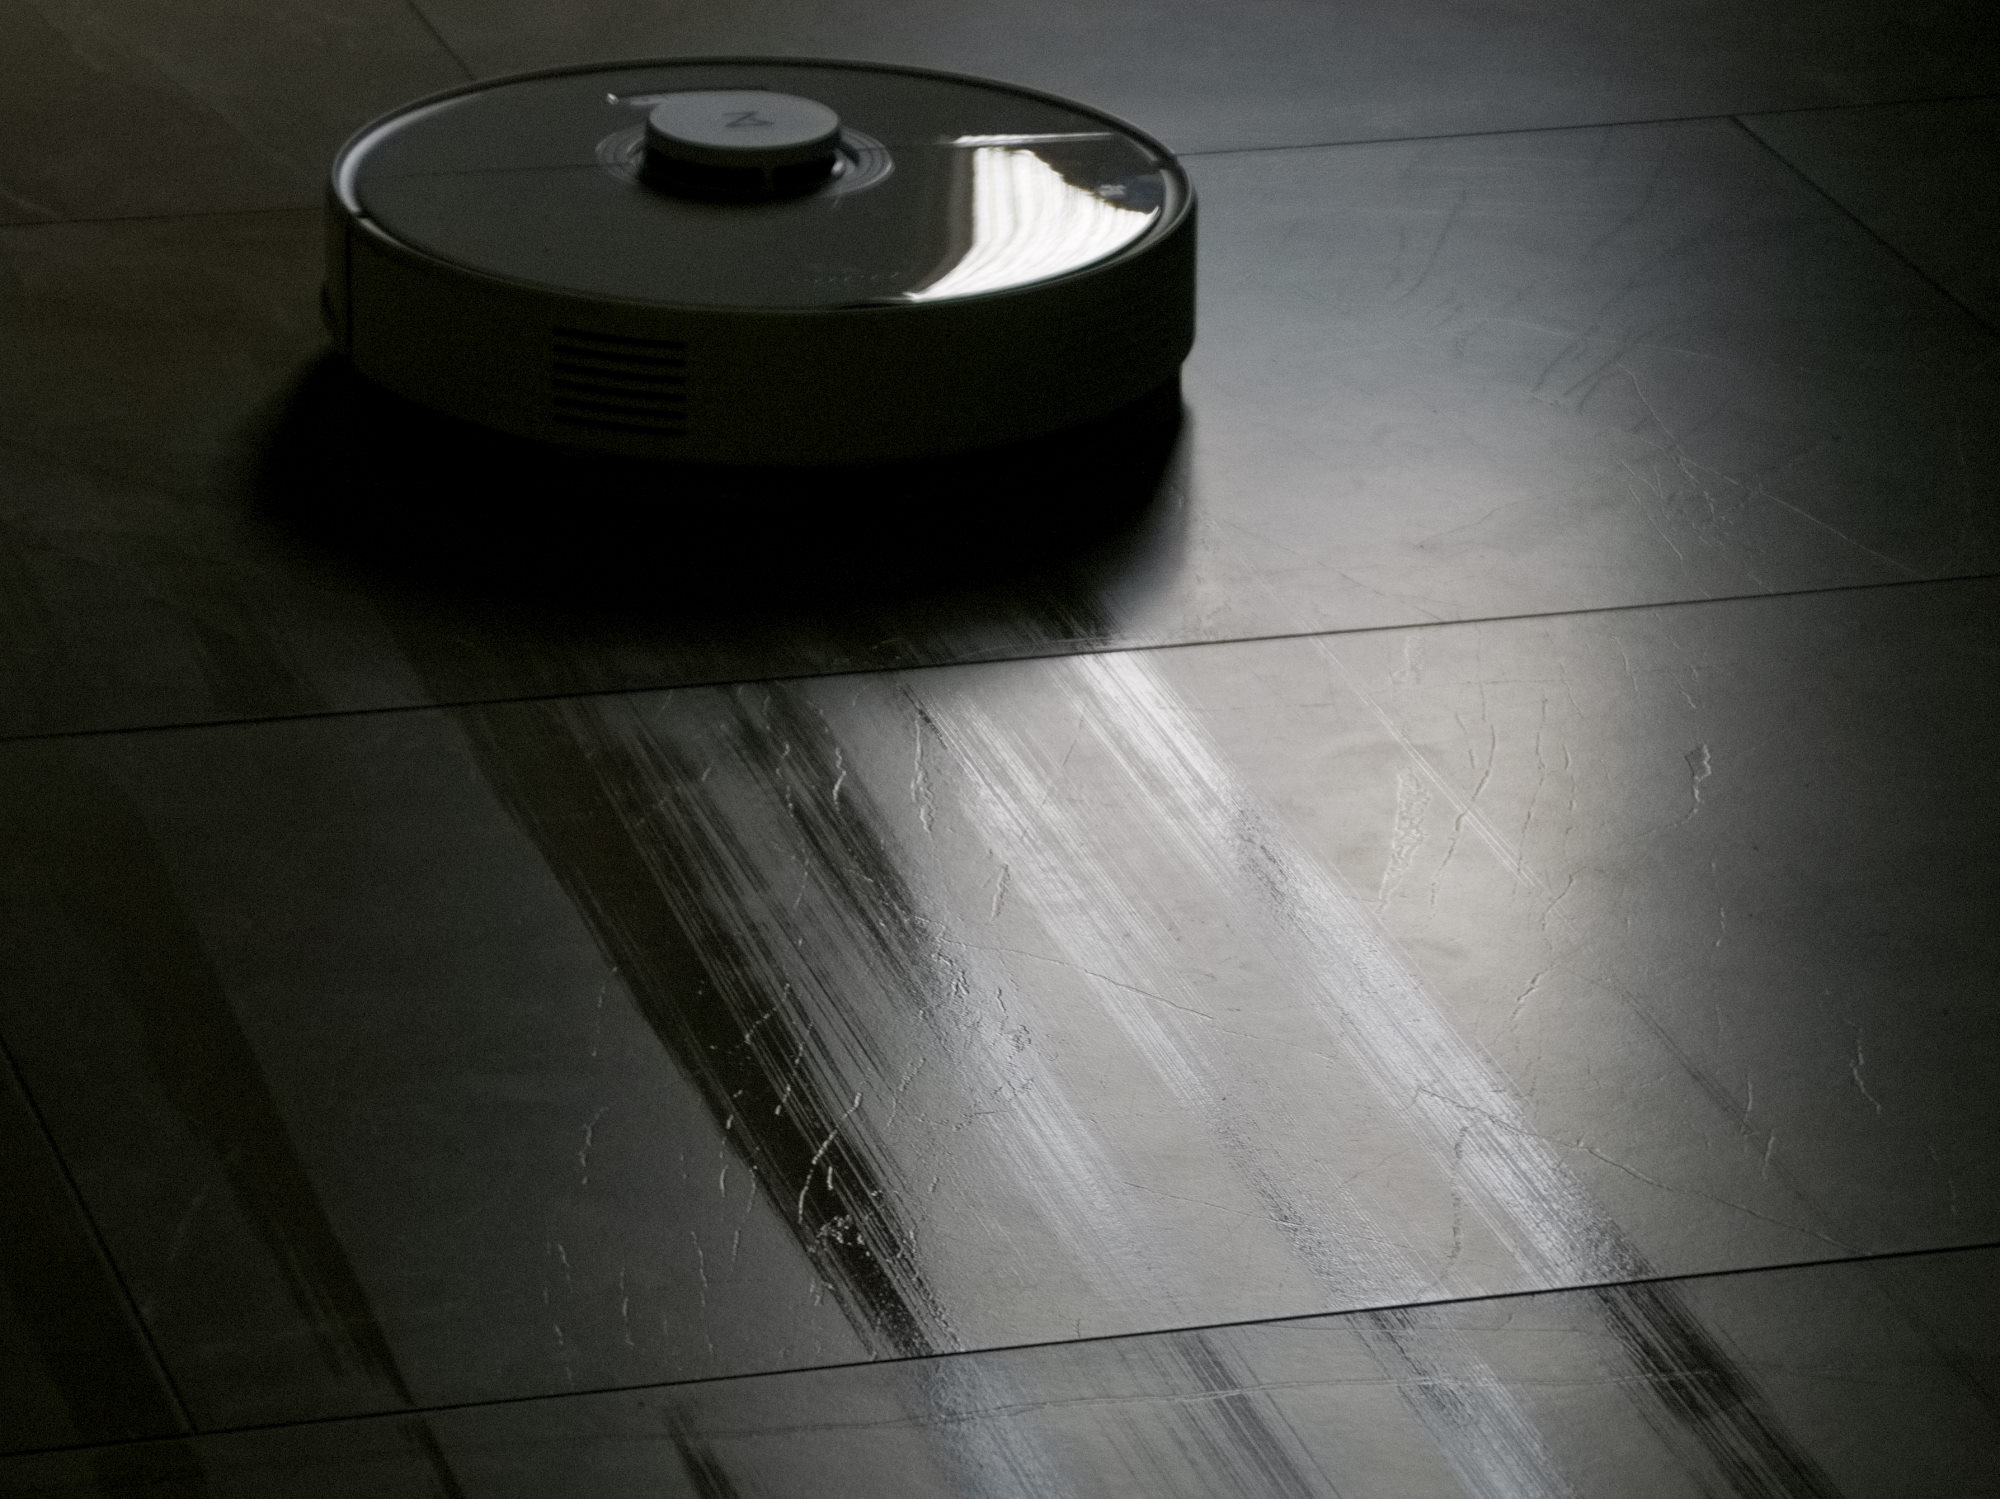 Roborock Q7 Max robot vacuum cleaner in review: High suction power at a  fair price -  Reviews